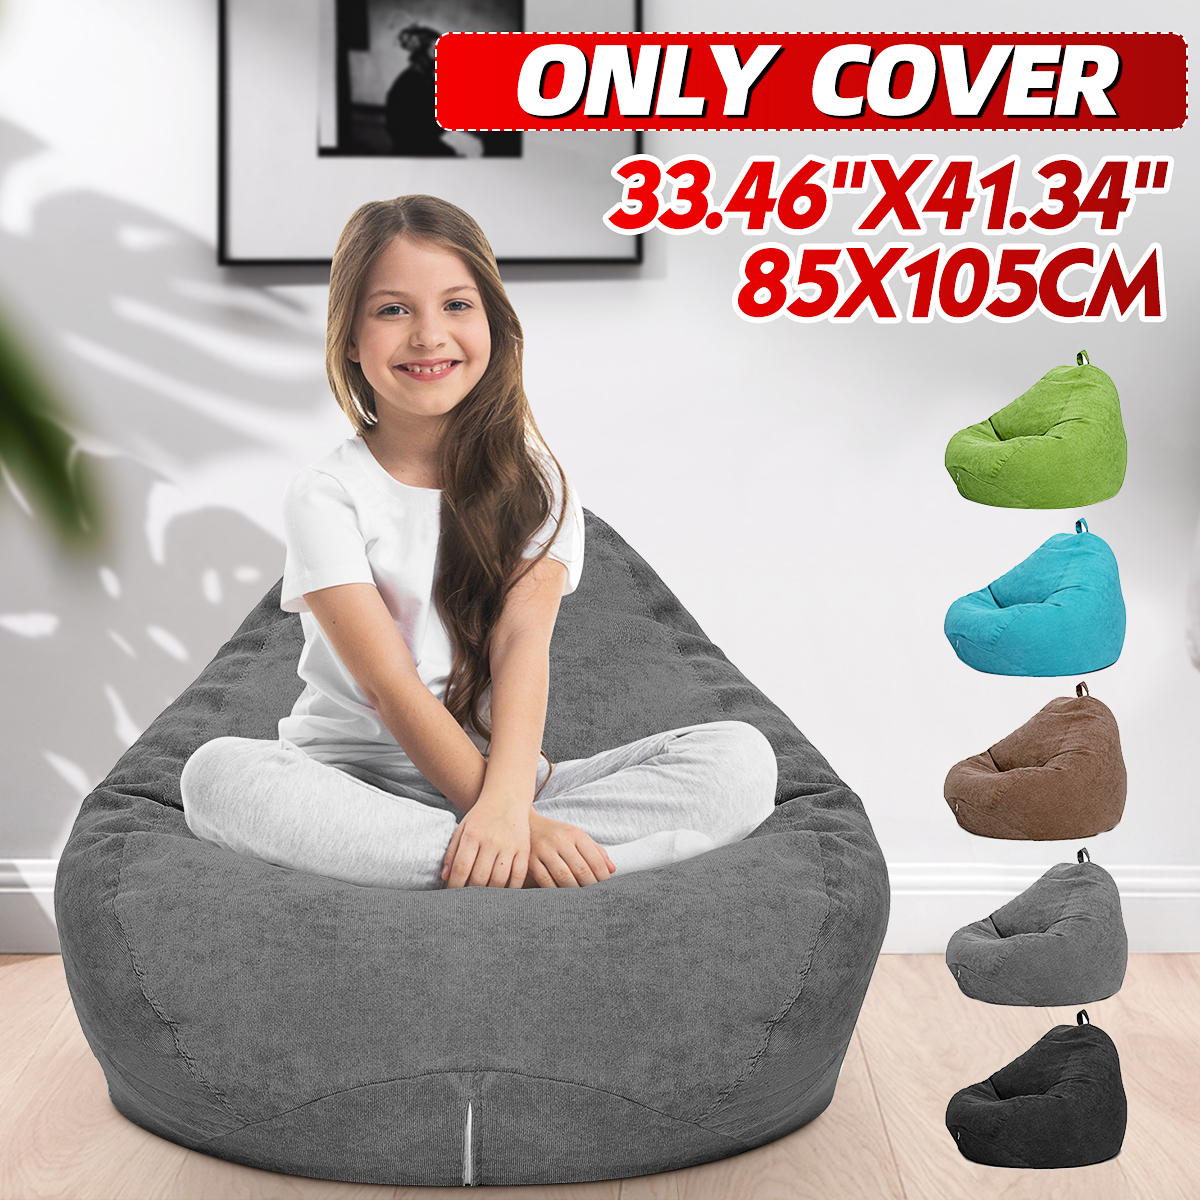 85x105CM Lazy Bean Bag Cover Seat Chair Indoor Corduroy Home 1